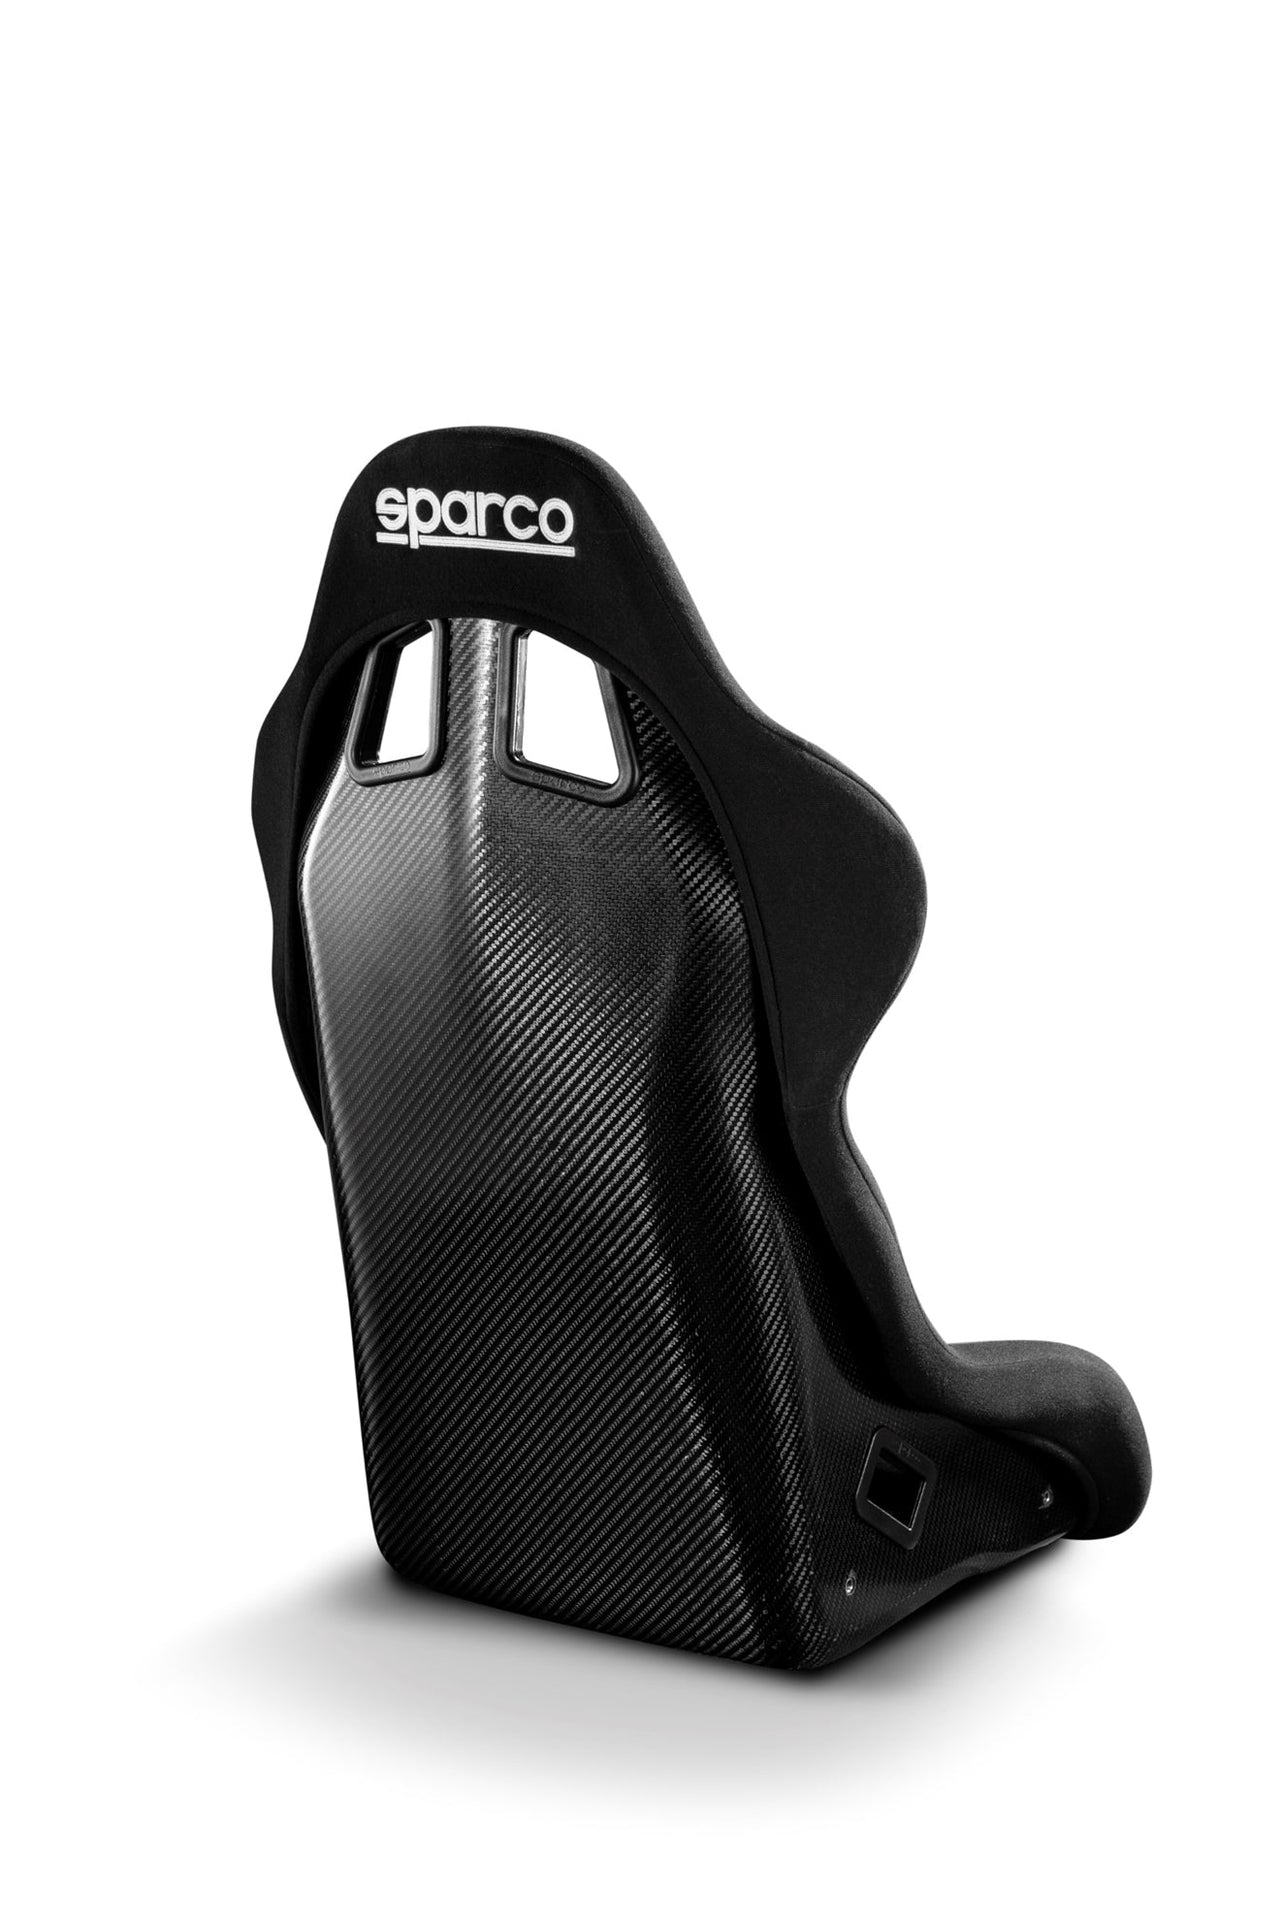 Sparco EVO, EVO L, and EVO XL Carbon Fiber Racing Seats ALL IN-STOCK at Competition  Motorsport –